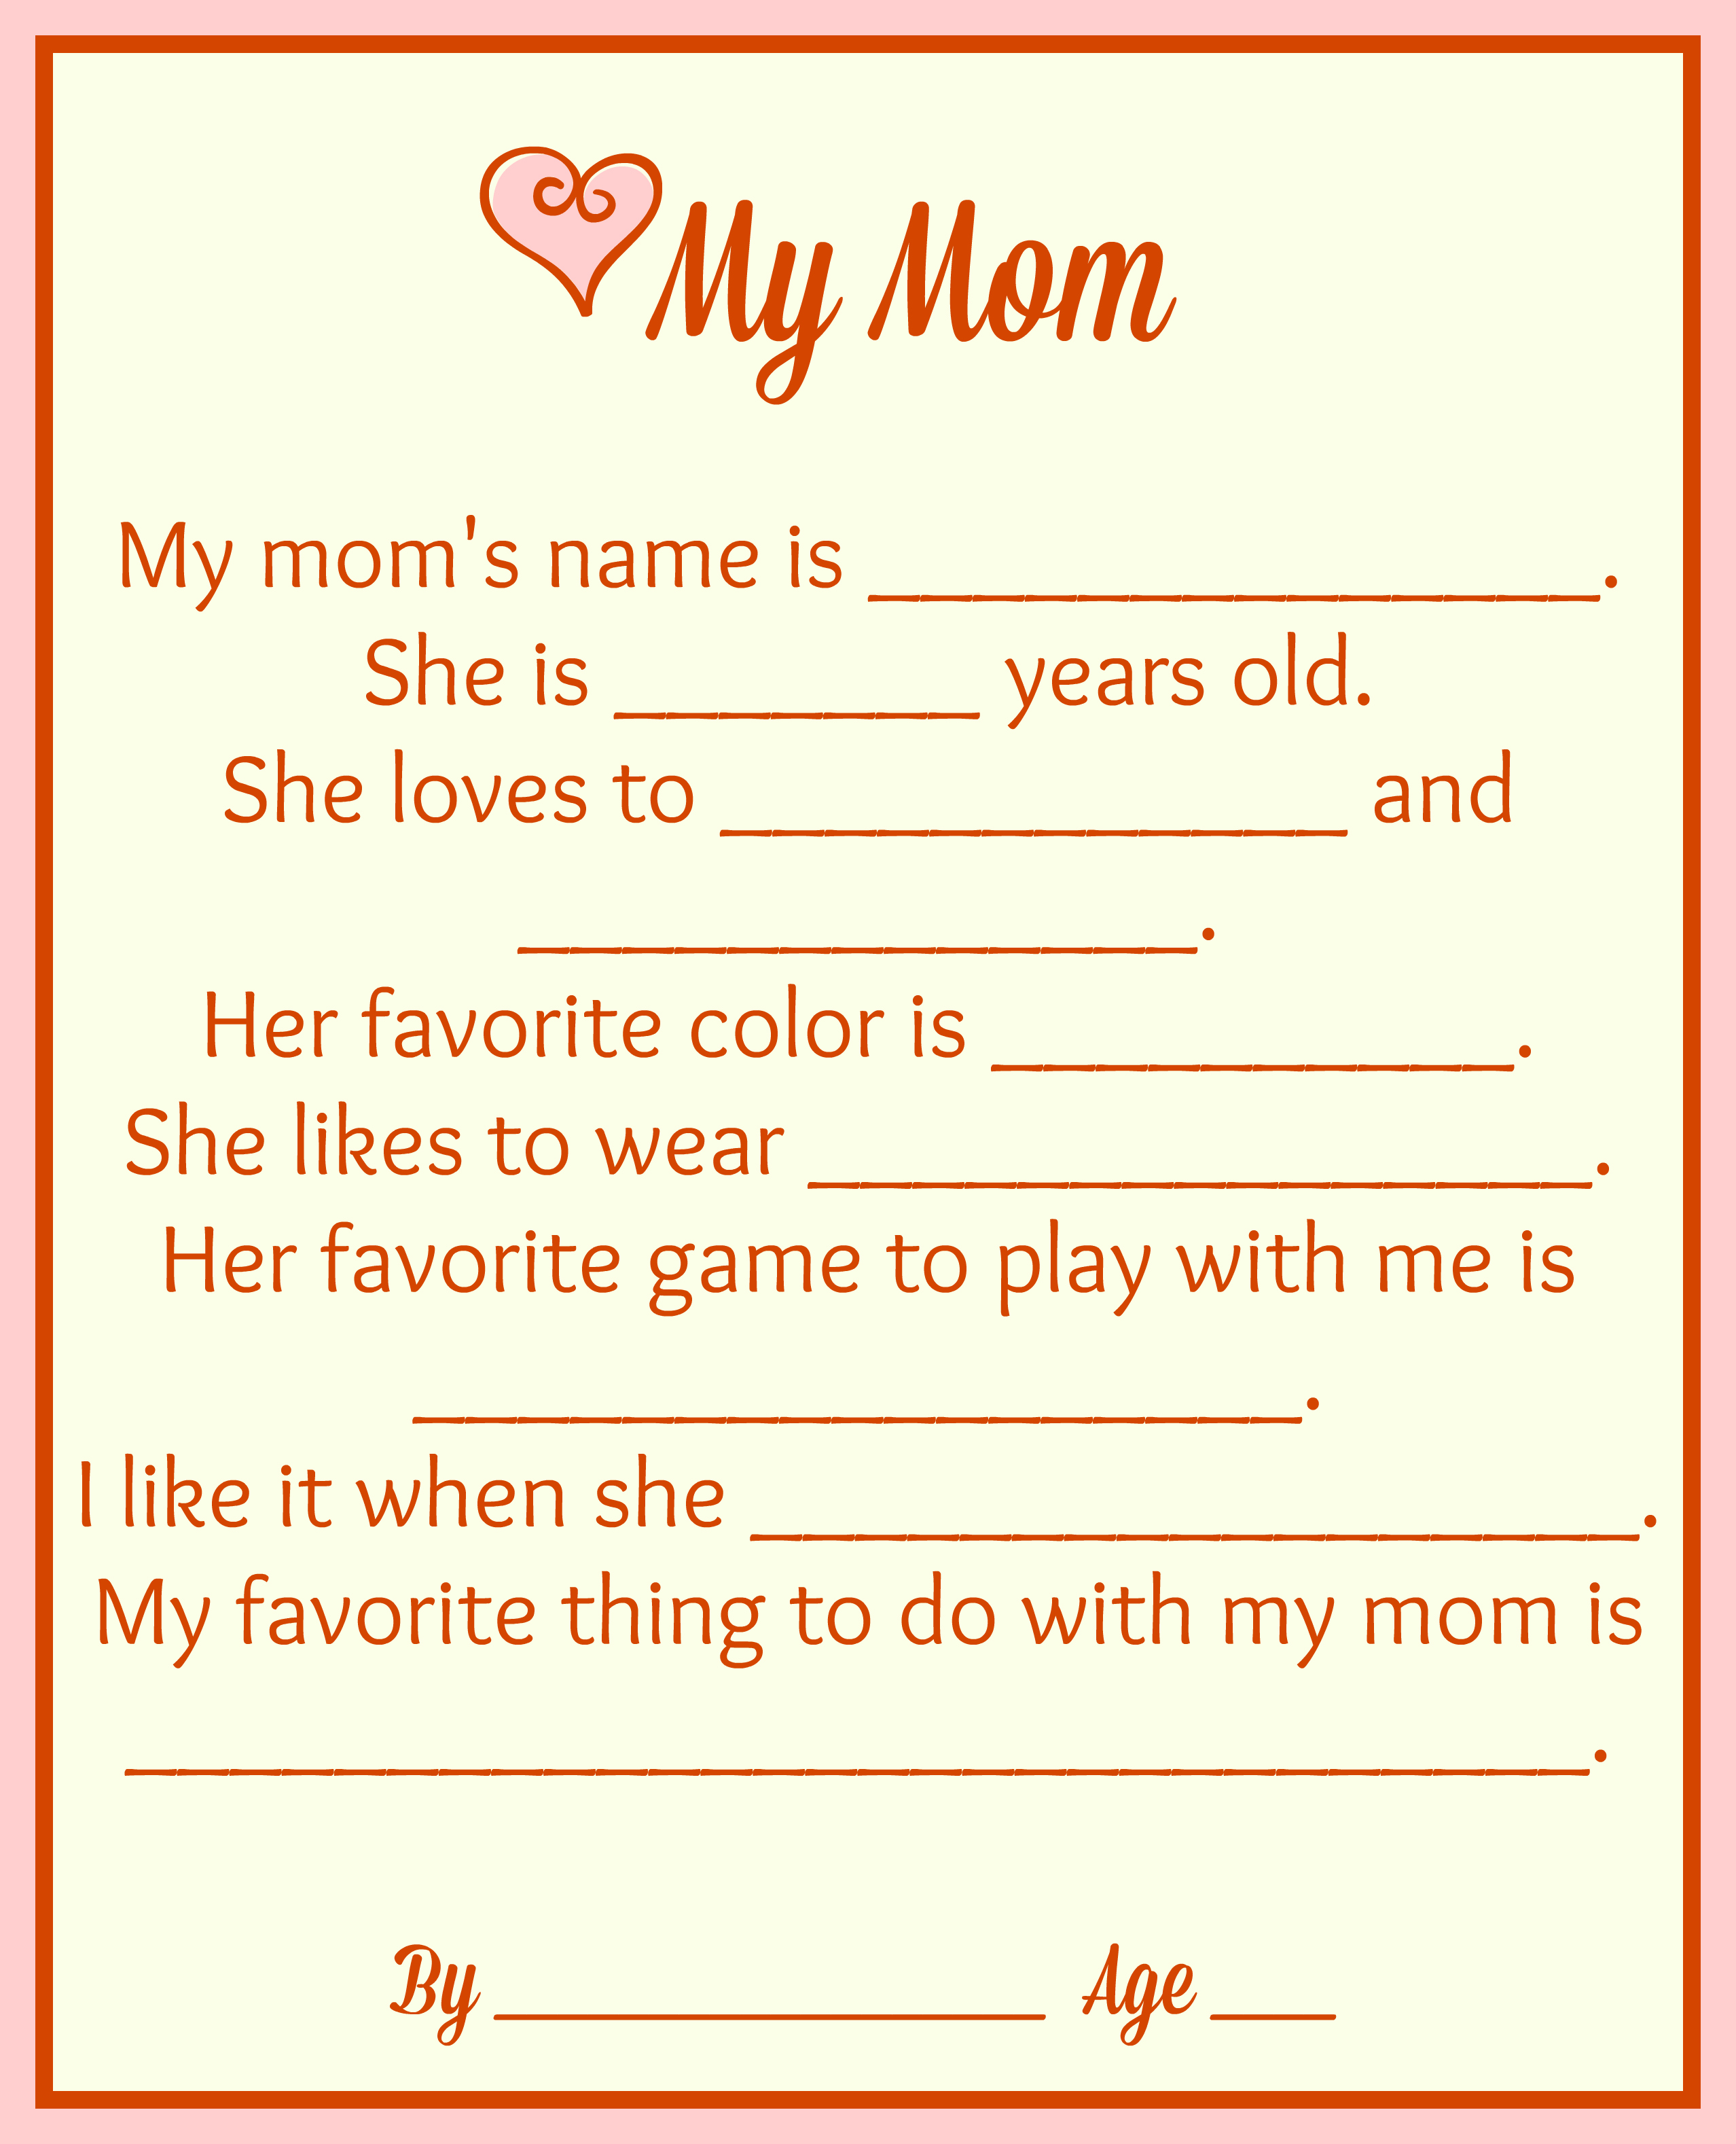 8 Best Images of Mom Questionnaire Printables All About My Mom